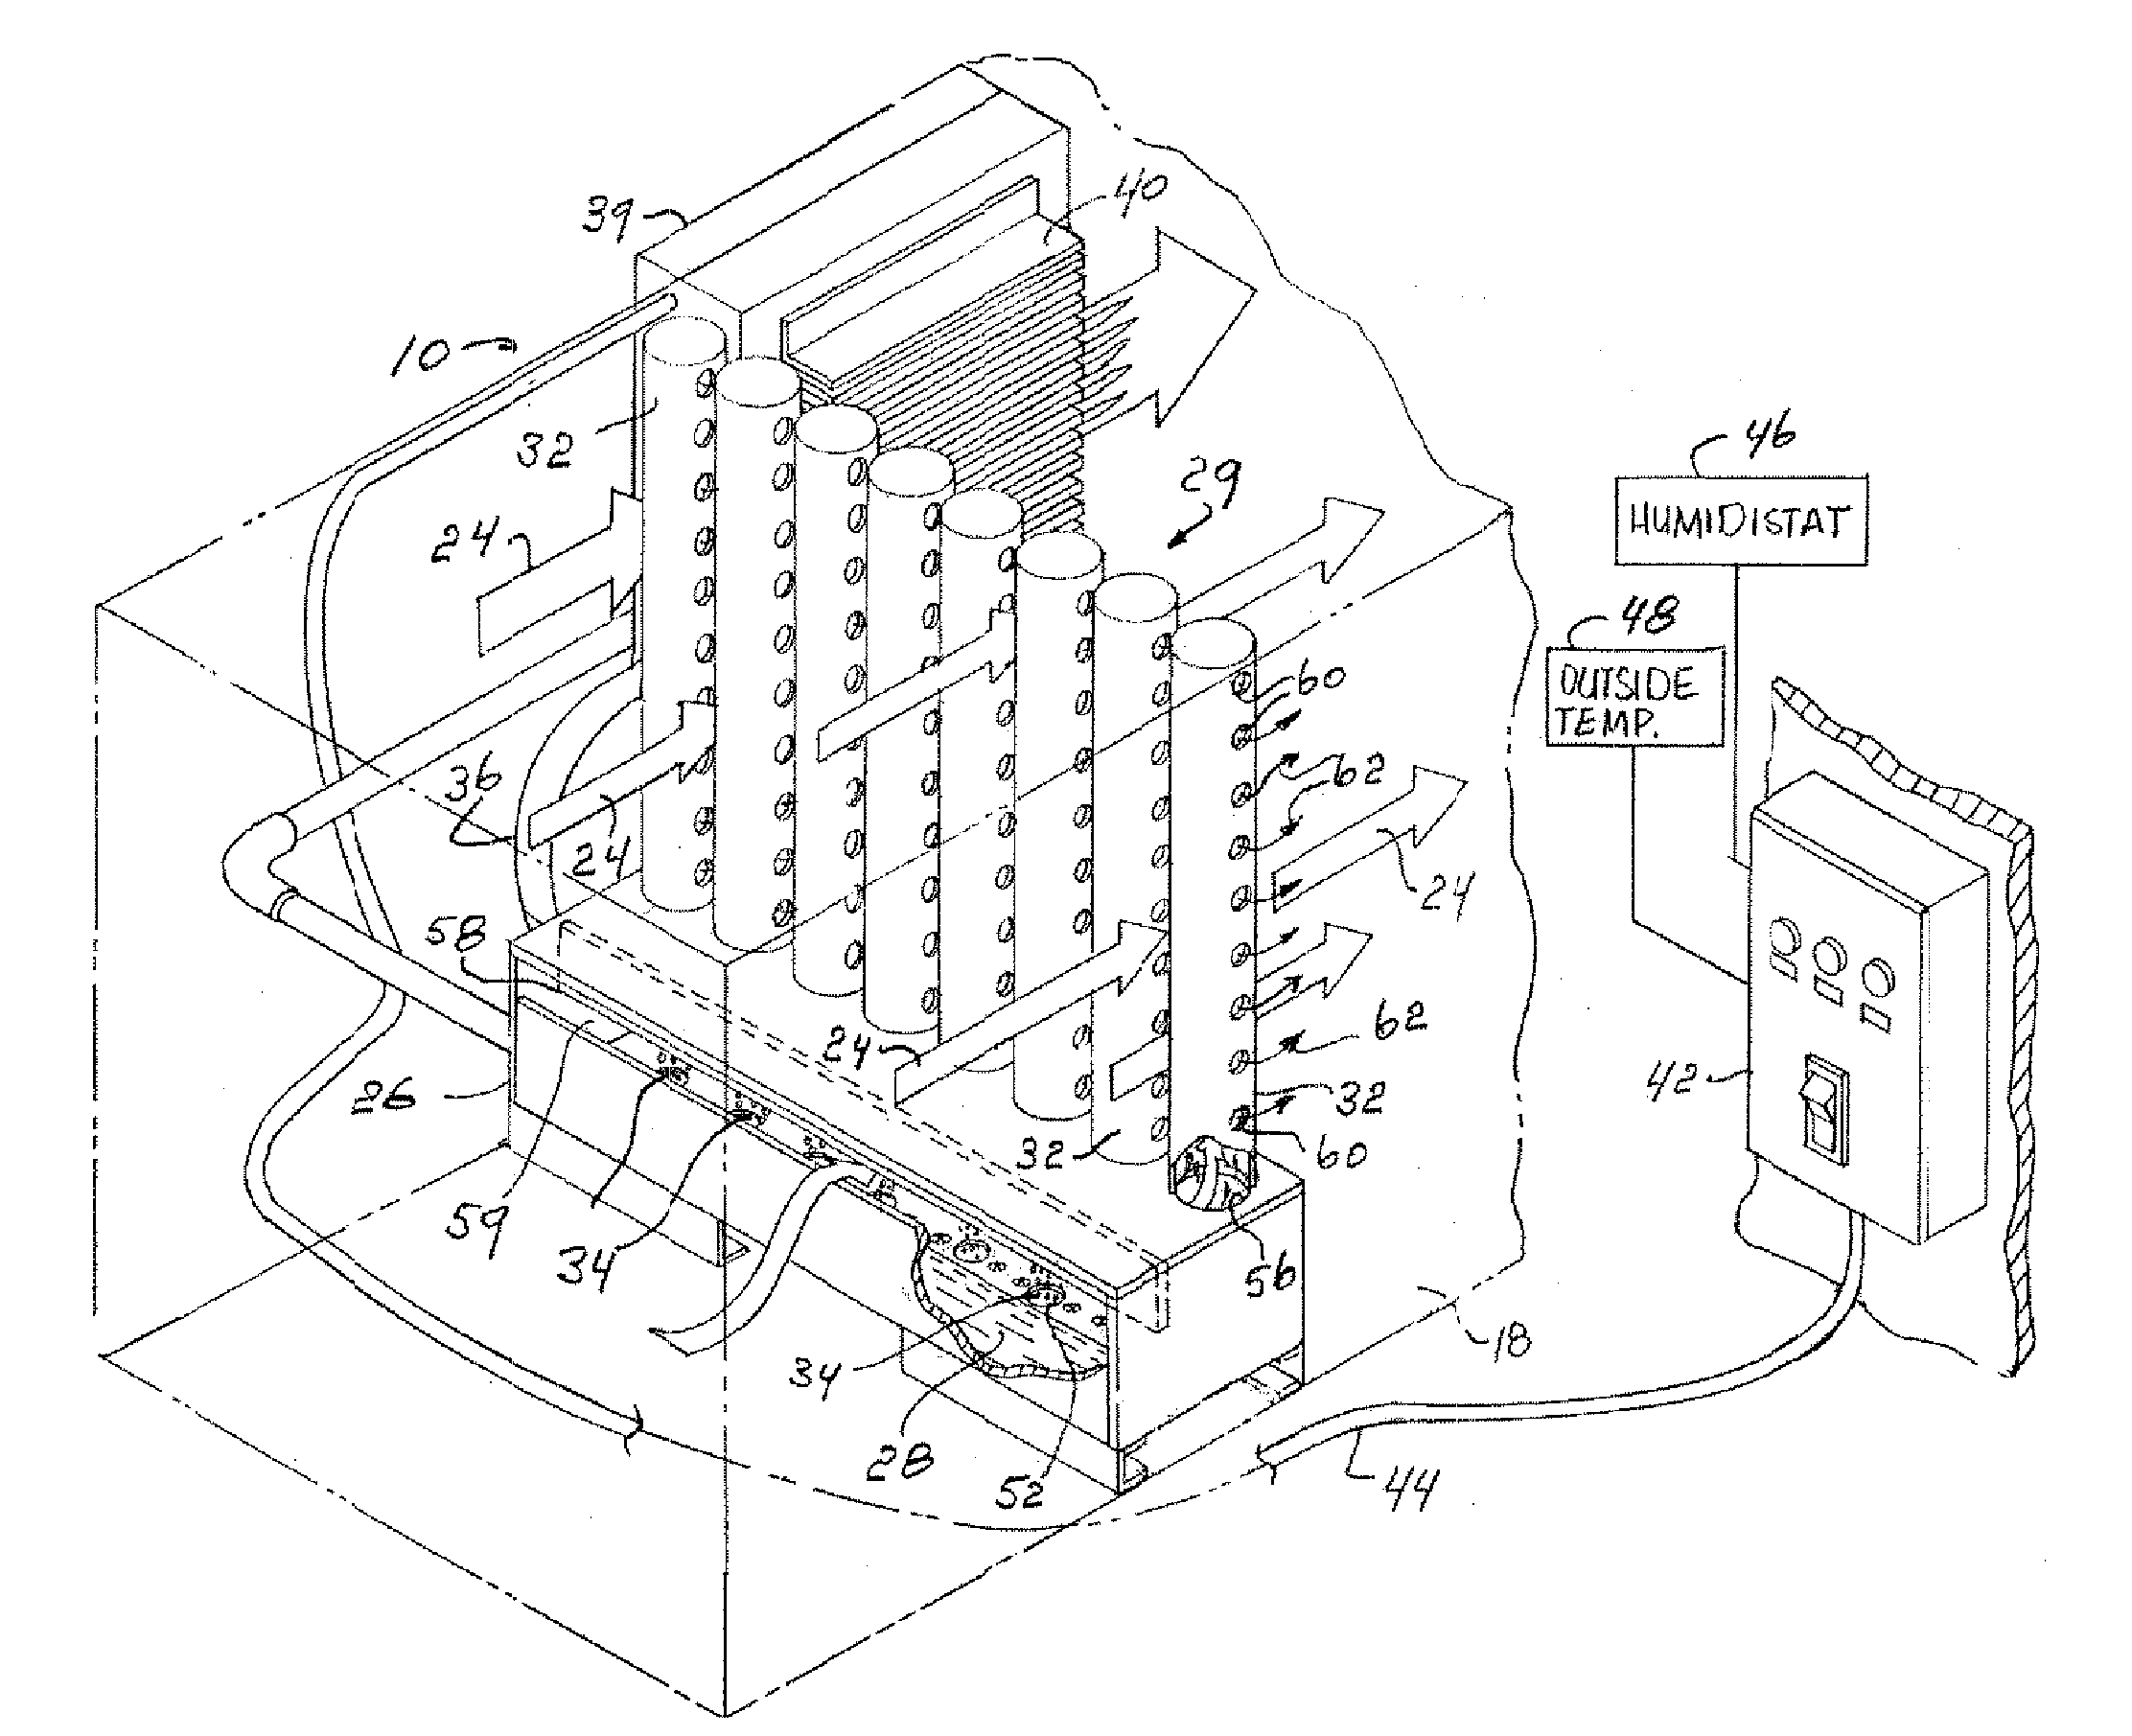 System and Method for Humidifying Homes and Commercial Sites